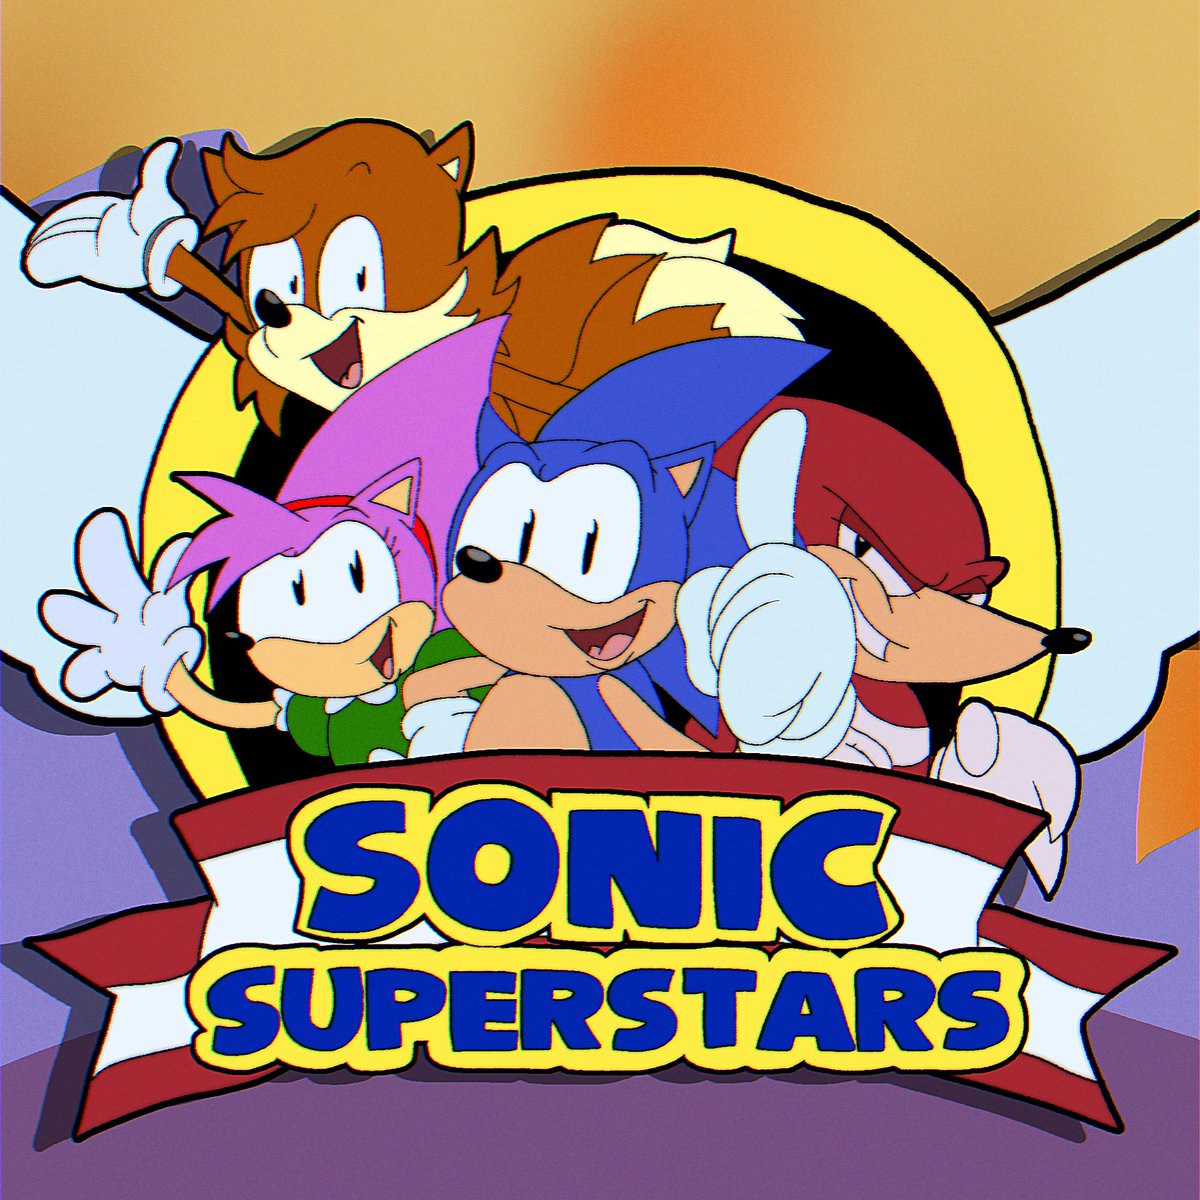 Sonic superstars but in the style of #adventuresofsonicthehedgehog 
#sonicsuperstars #sonicthehedgehog #sonicfanart